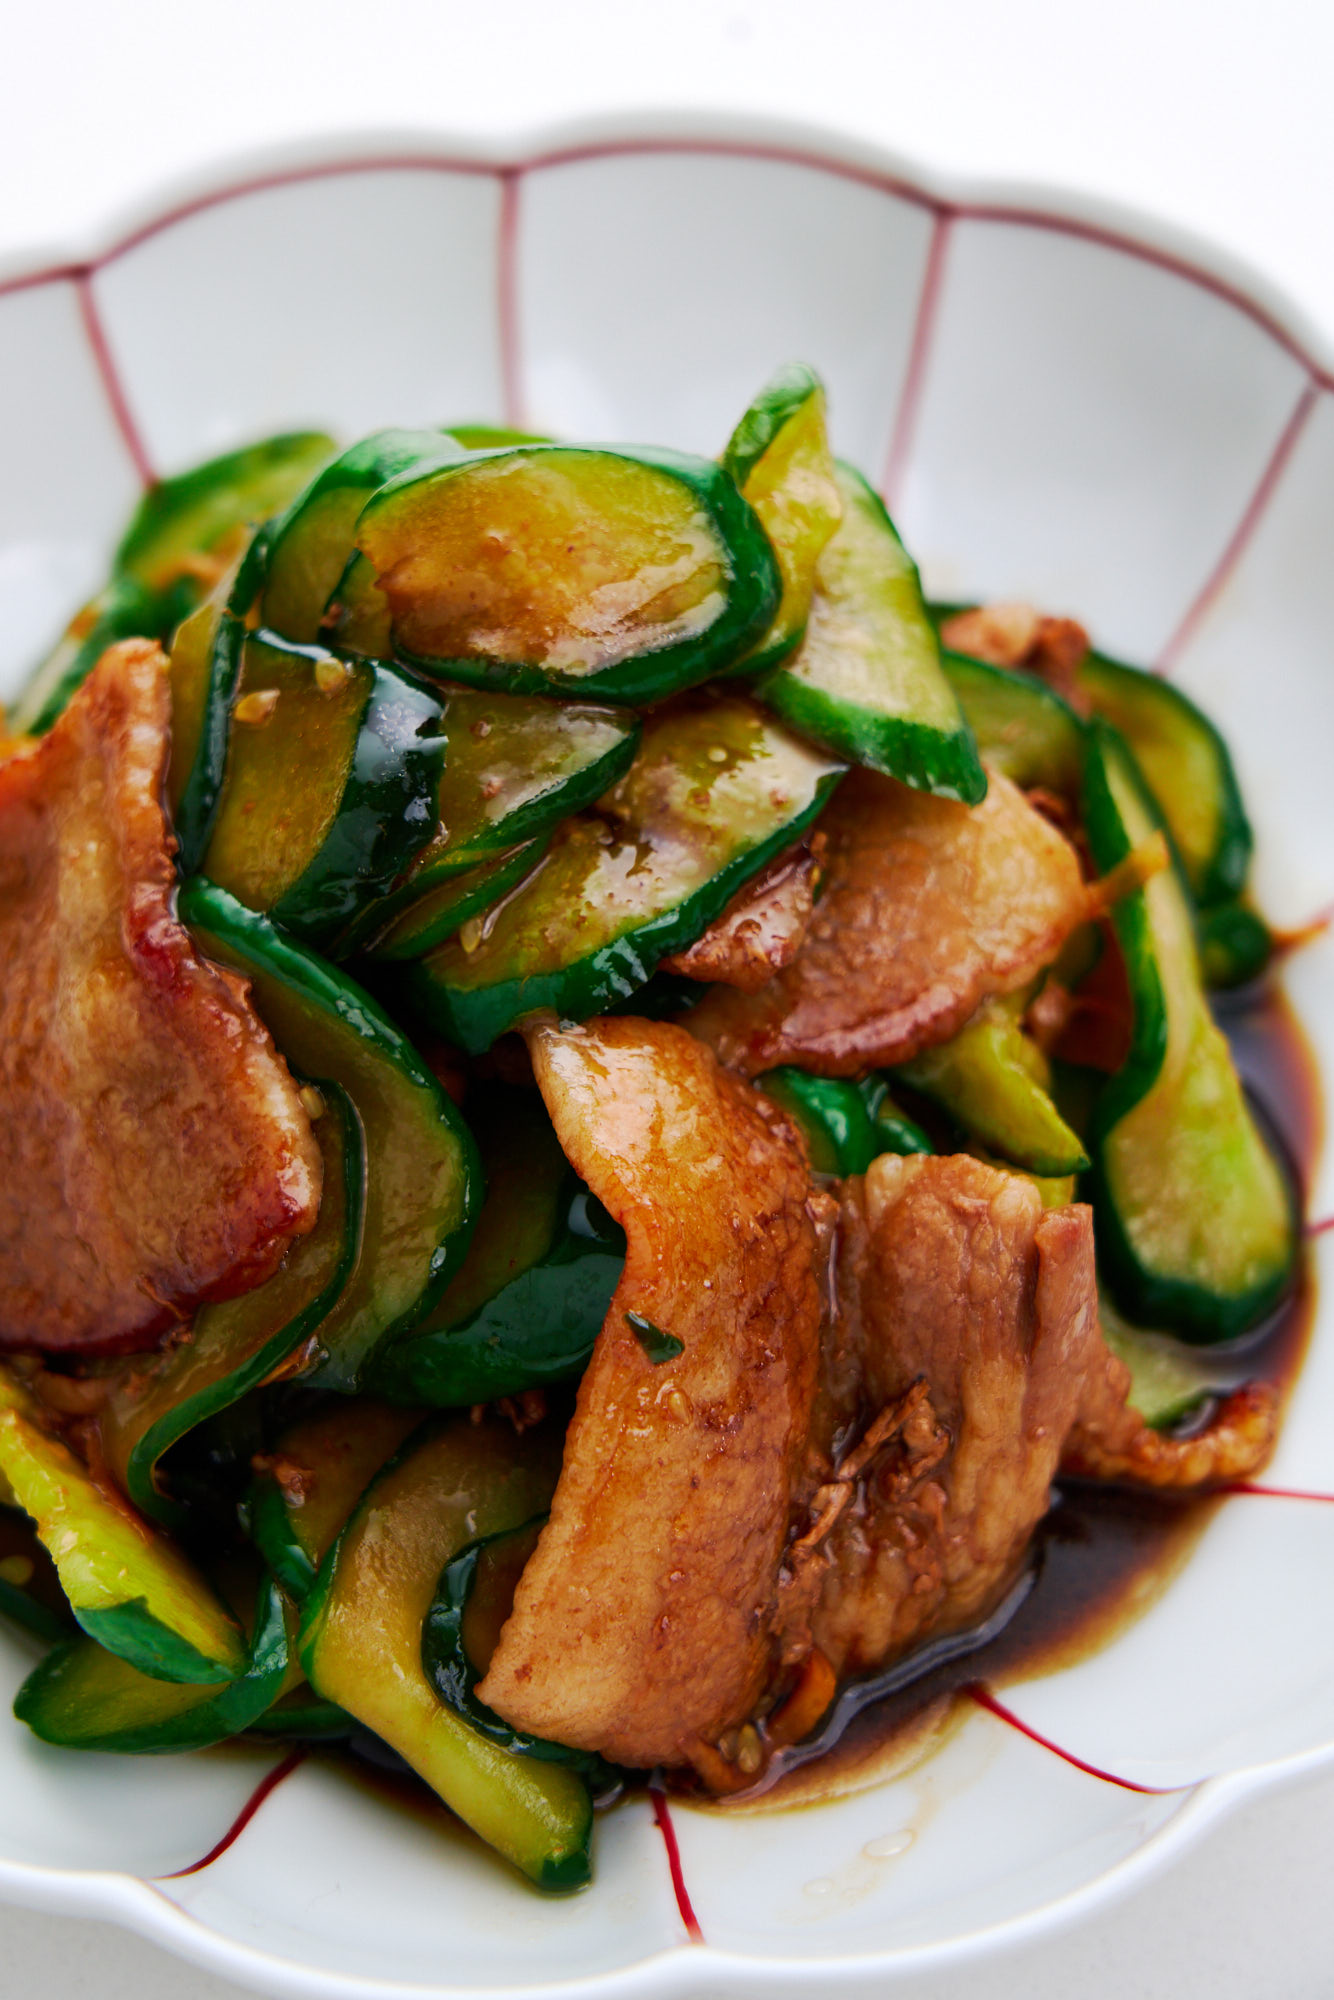 Tangy Cucumber & Pork Belly Stir-fry from above.